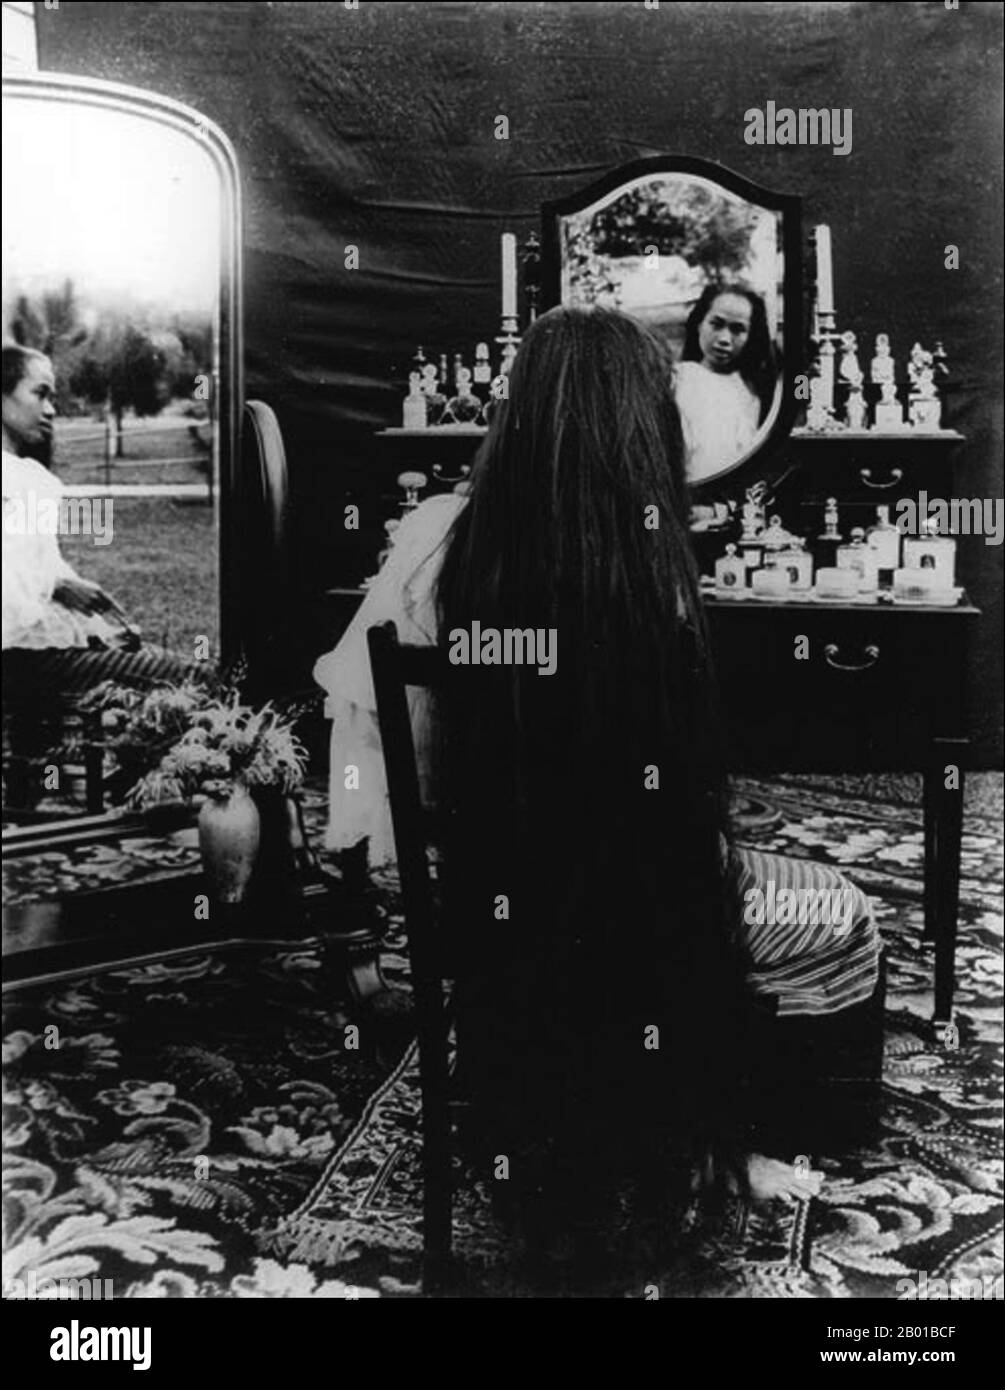 Thailand: Dara Rasmi (26 August 1873 - 9 December 1933), Princess of Chiang Mai and Siam posing with mirrors to display her long hair. Photo by Abe Bunnak (fl. early 20th century), 1905.  Princess Dara Rasmi was the Princess of Chiang Mai and Siam (later Thailand) and the daughter of King Inthawichayanon and Queen Thipkraisorn Rajadewi of Chang Mai, a scion of the Chao Chet Ton Dynasty. She was one of the princess consorts of Chulalongkorn, King Rama V of Siam, and gave birth to one daughter by King Chulalongkorn, Princess Vimolnaka Nabisi. Stock Photo